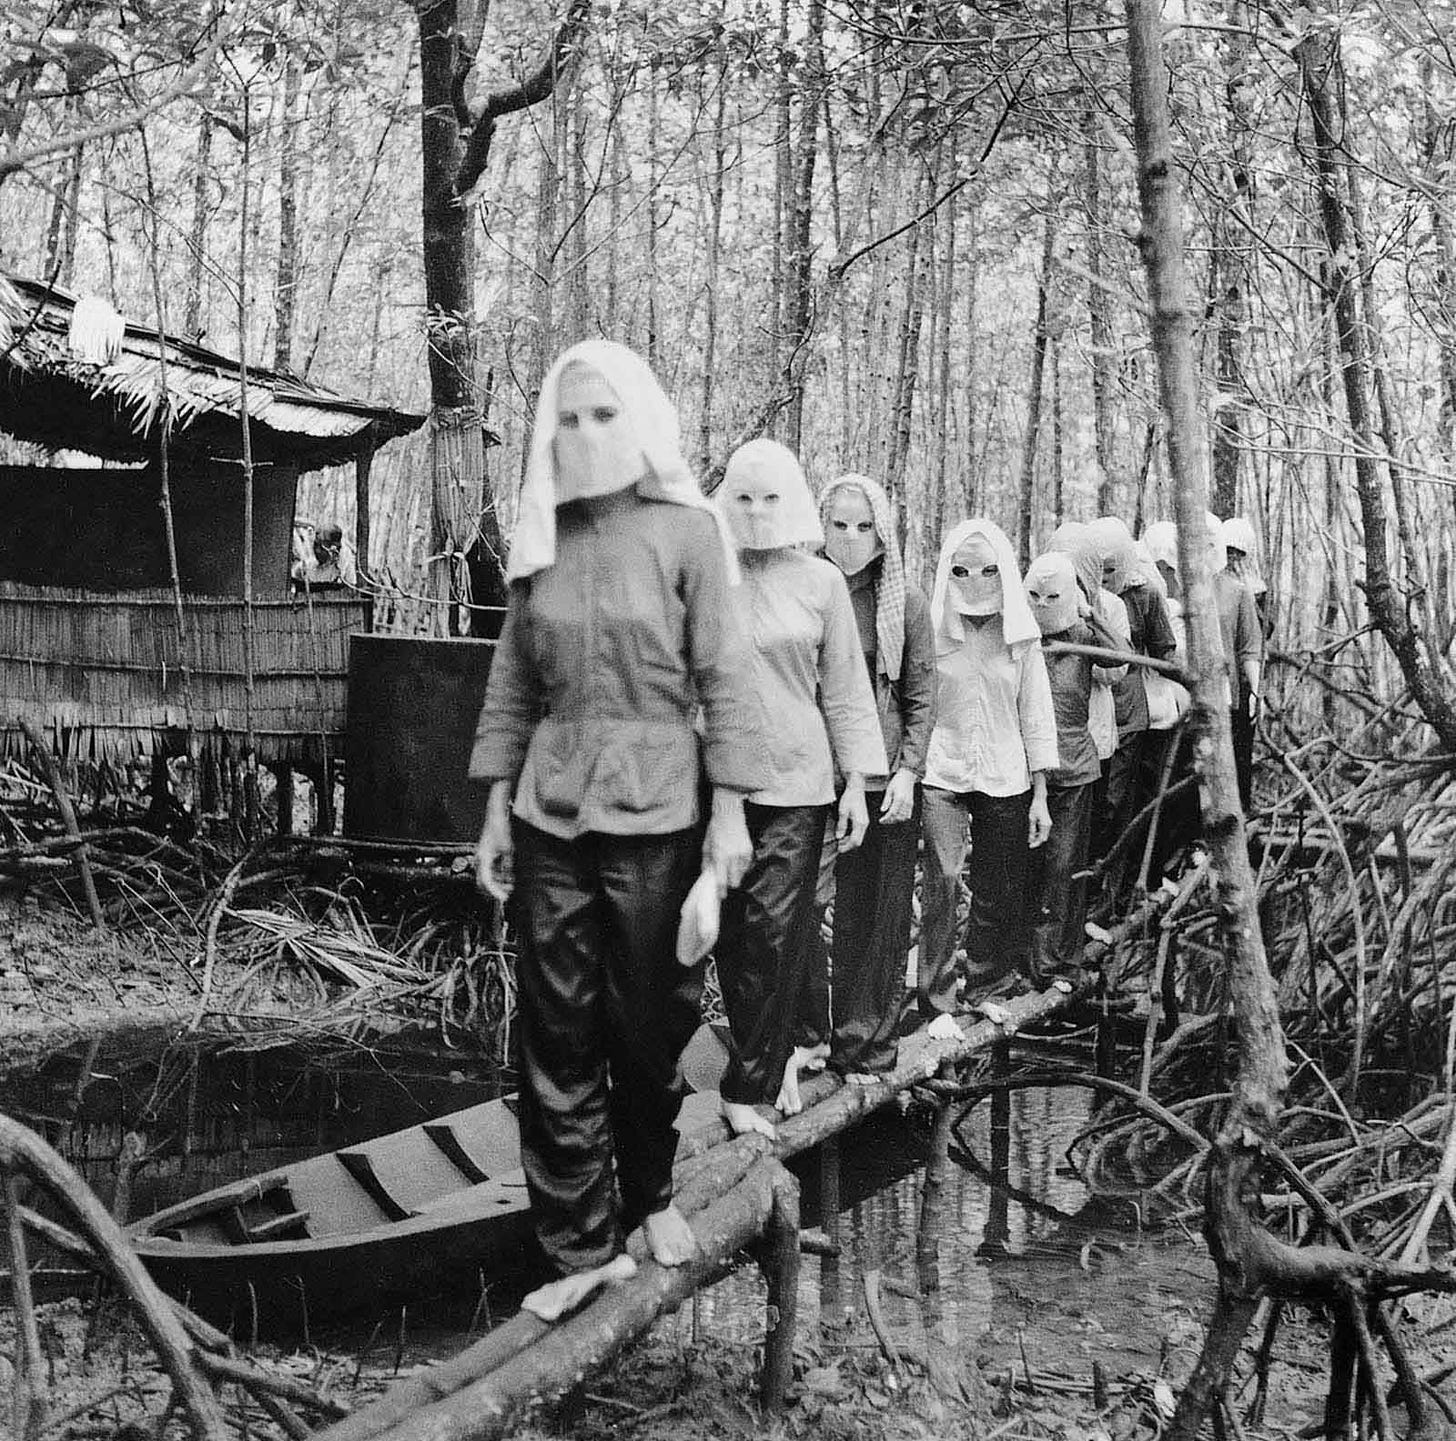 Activists meet in the Nam Can forest, wearing masks to hide their identities from one another in case of capture and interrogation. From here in the mangrove swamps of the Mekong Delta, forwarding images to the North was difficult. “Sometimes the photos were lost or confiscated on the way,” said the photographer. 1972. (Photo by Vo Anh Khanh).